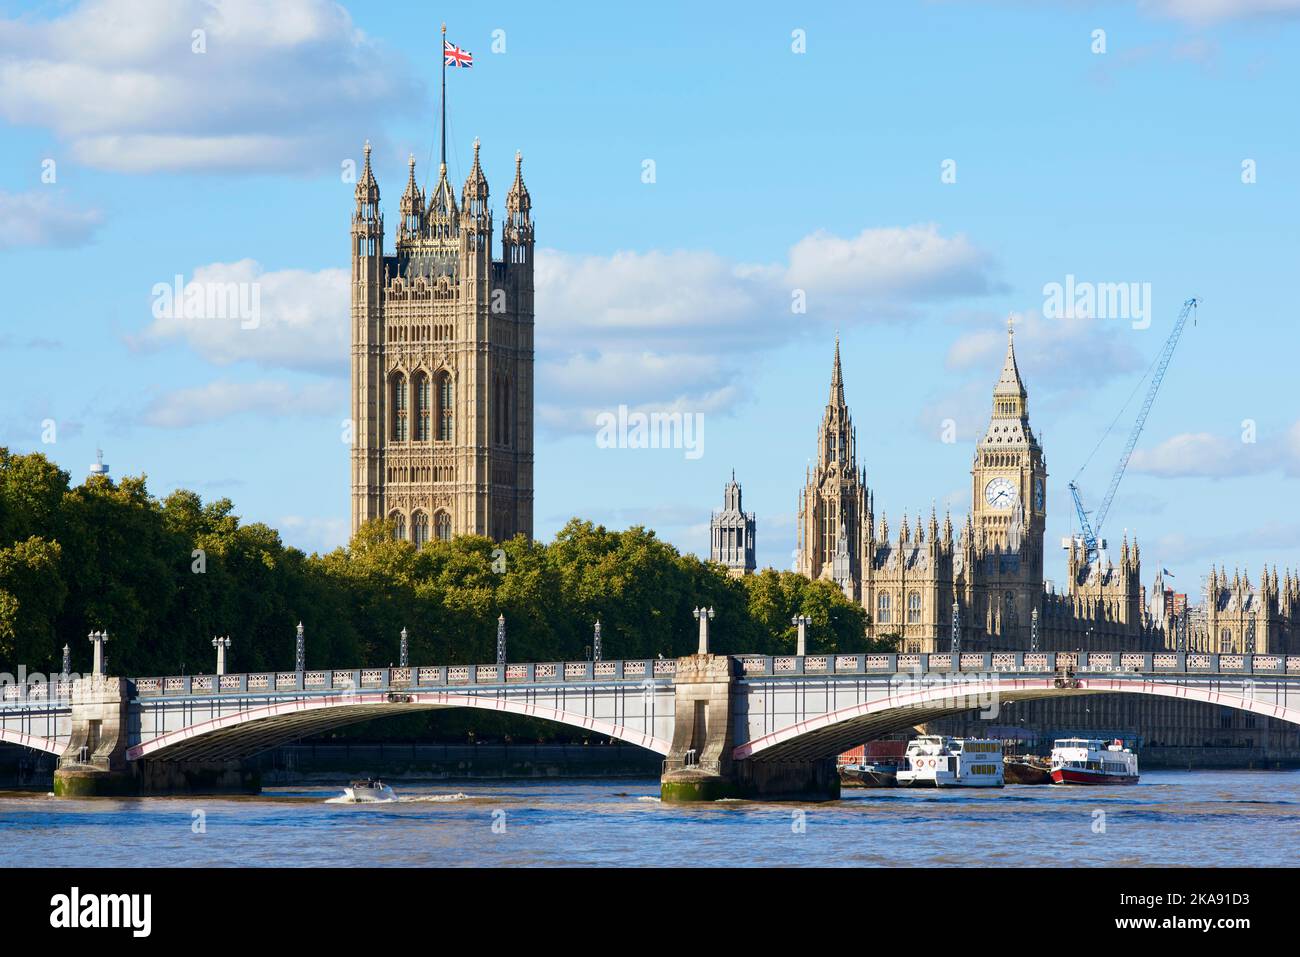 The Palace of Westminster, London UK, from the South Bank, with the River Thames and Lambeth Bridge Stock Photo